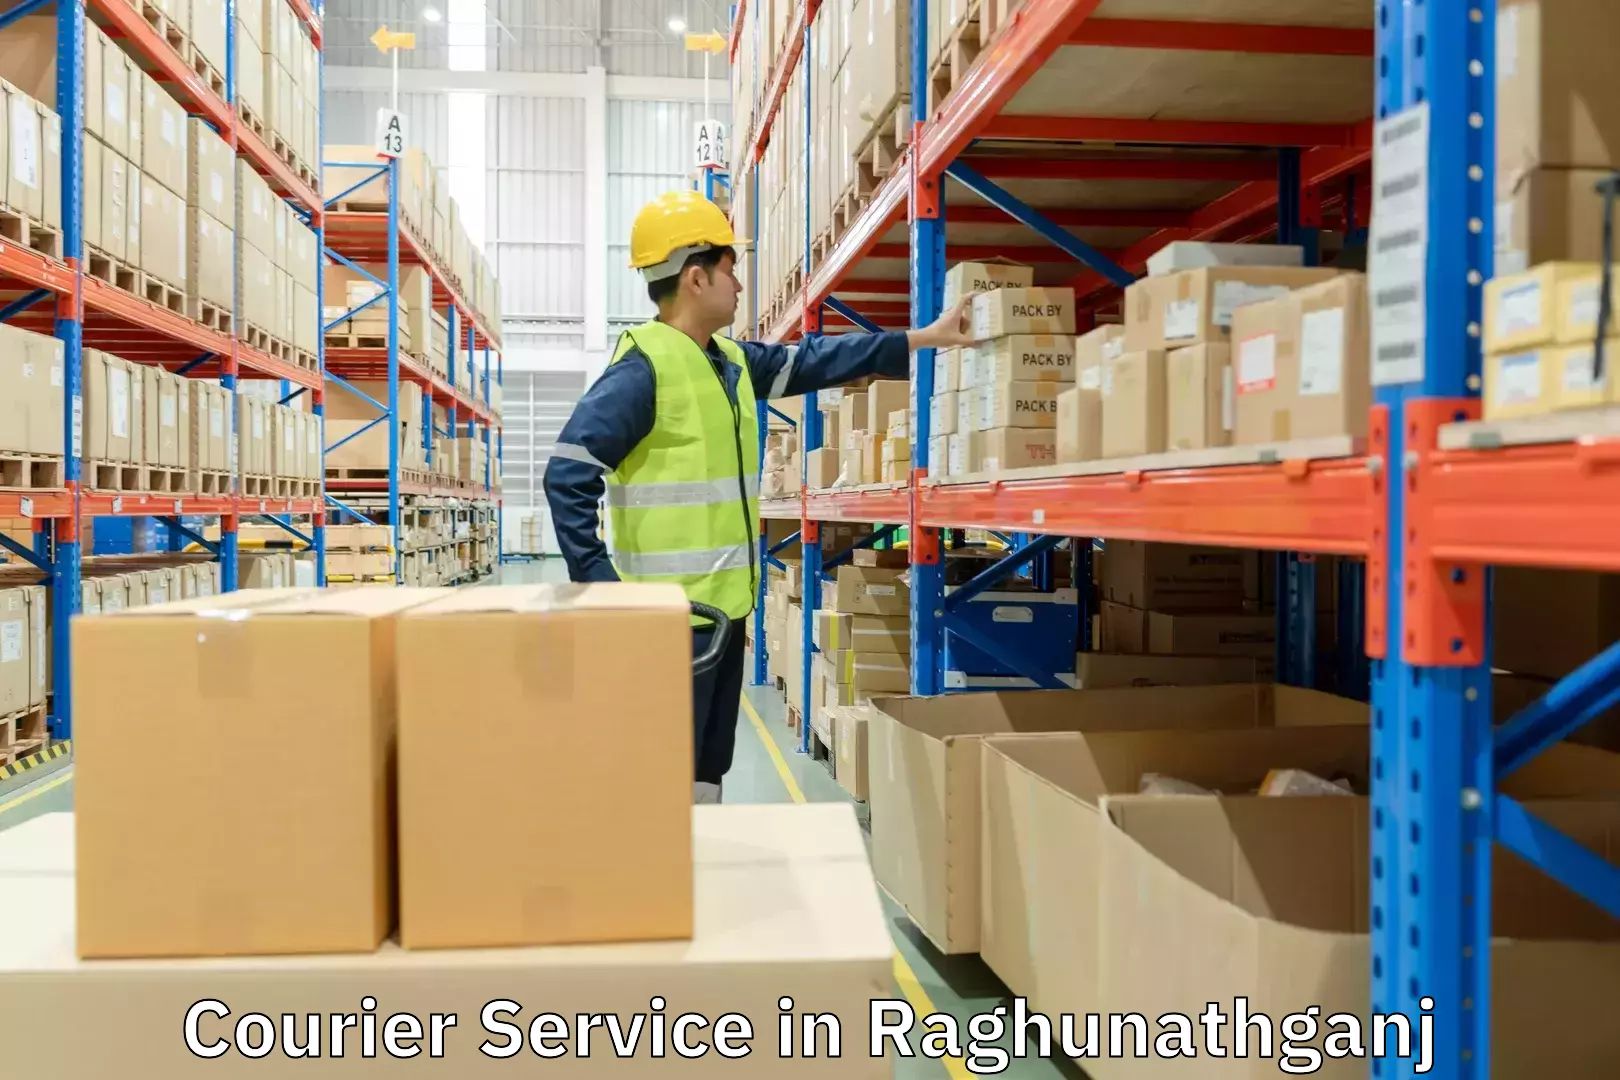 Reliable parcel services in Raghunathganj